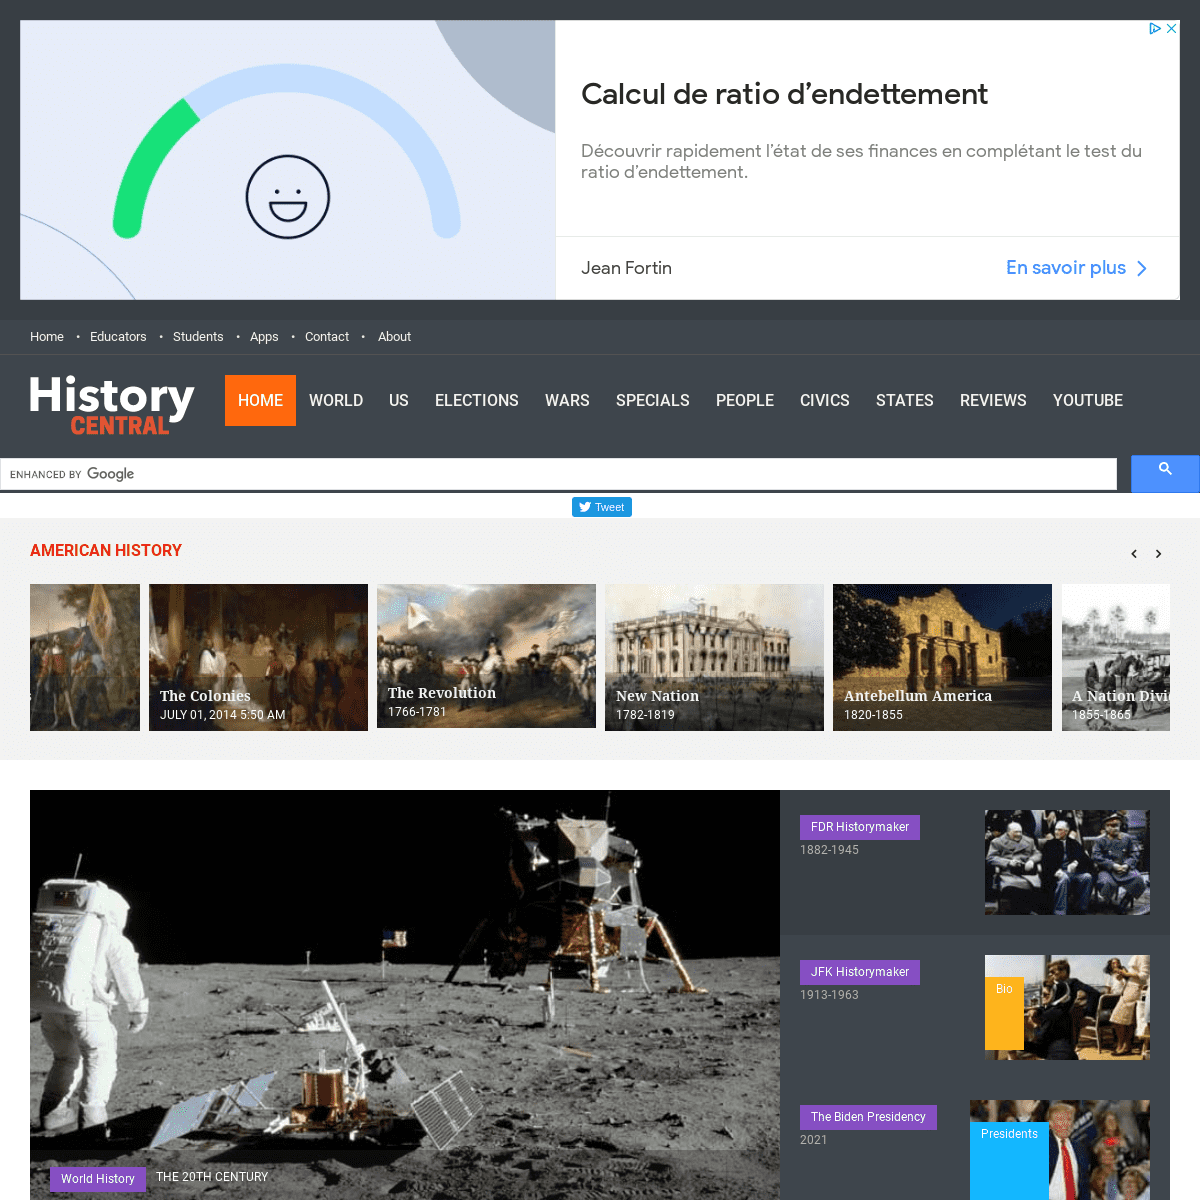 A complete backup of https://historycentral.com